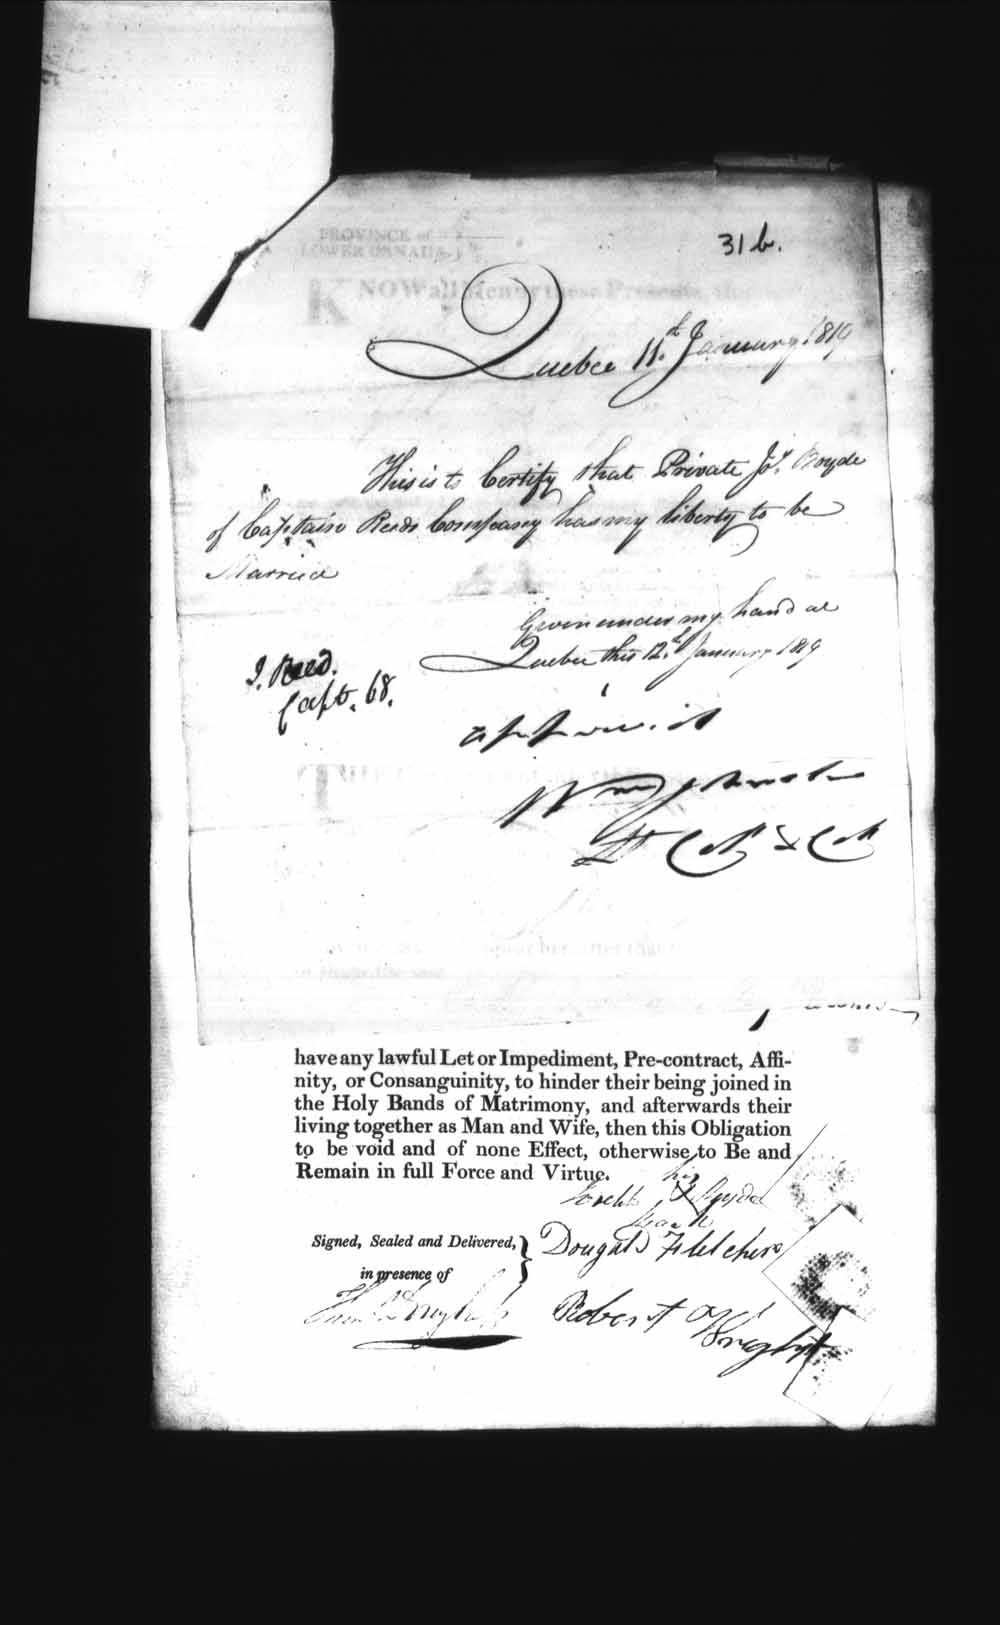 Digitized page of Upper and Lower Canada Marriage Bonds (1779-1865) for Image No.: e008235845